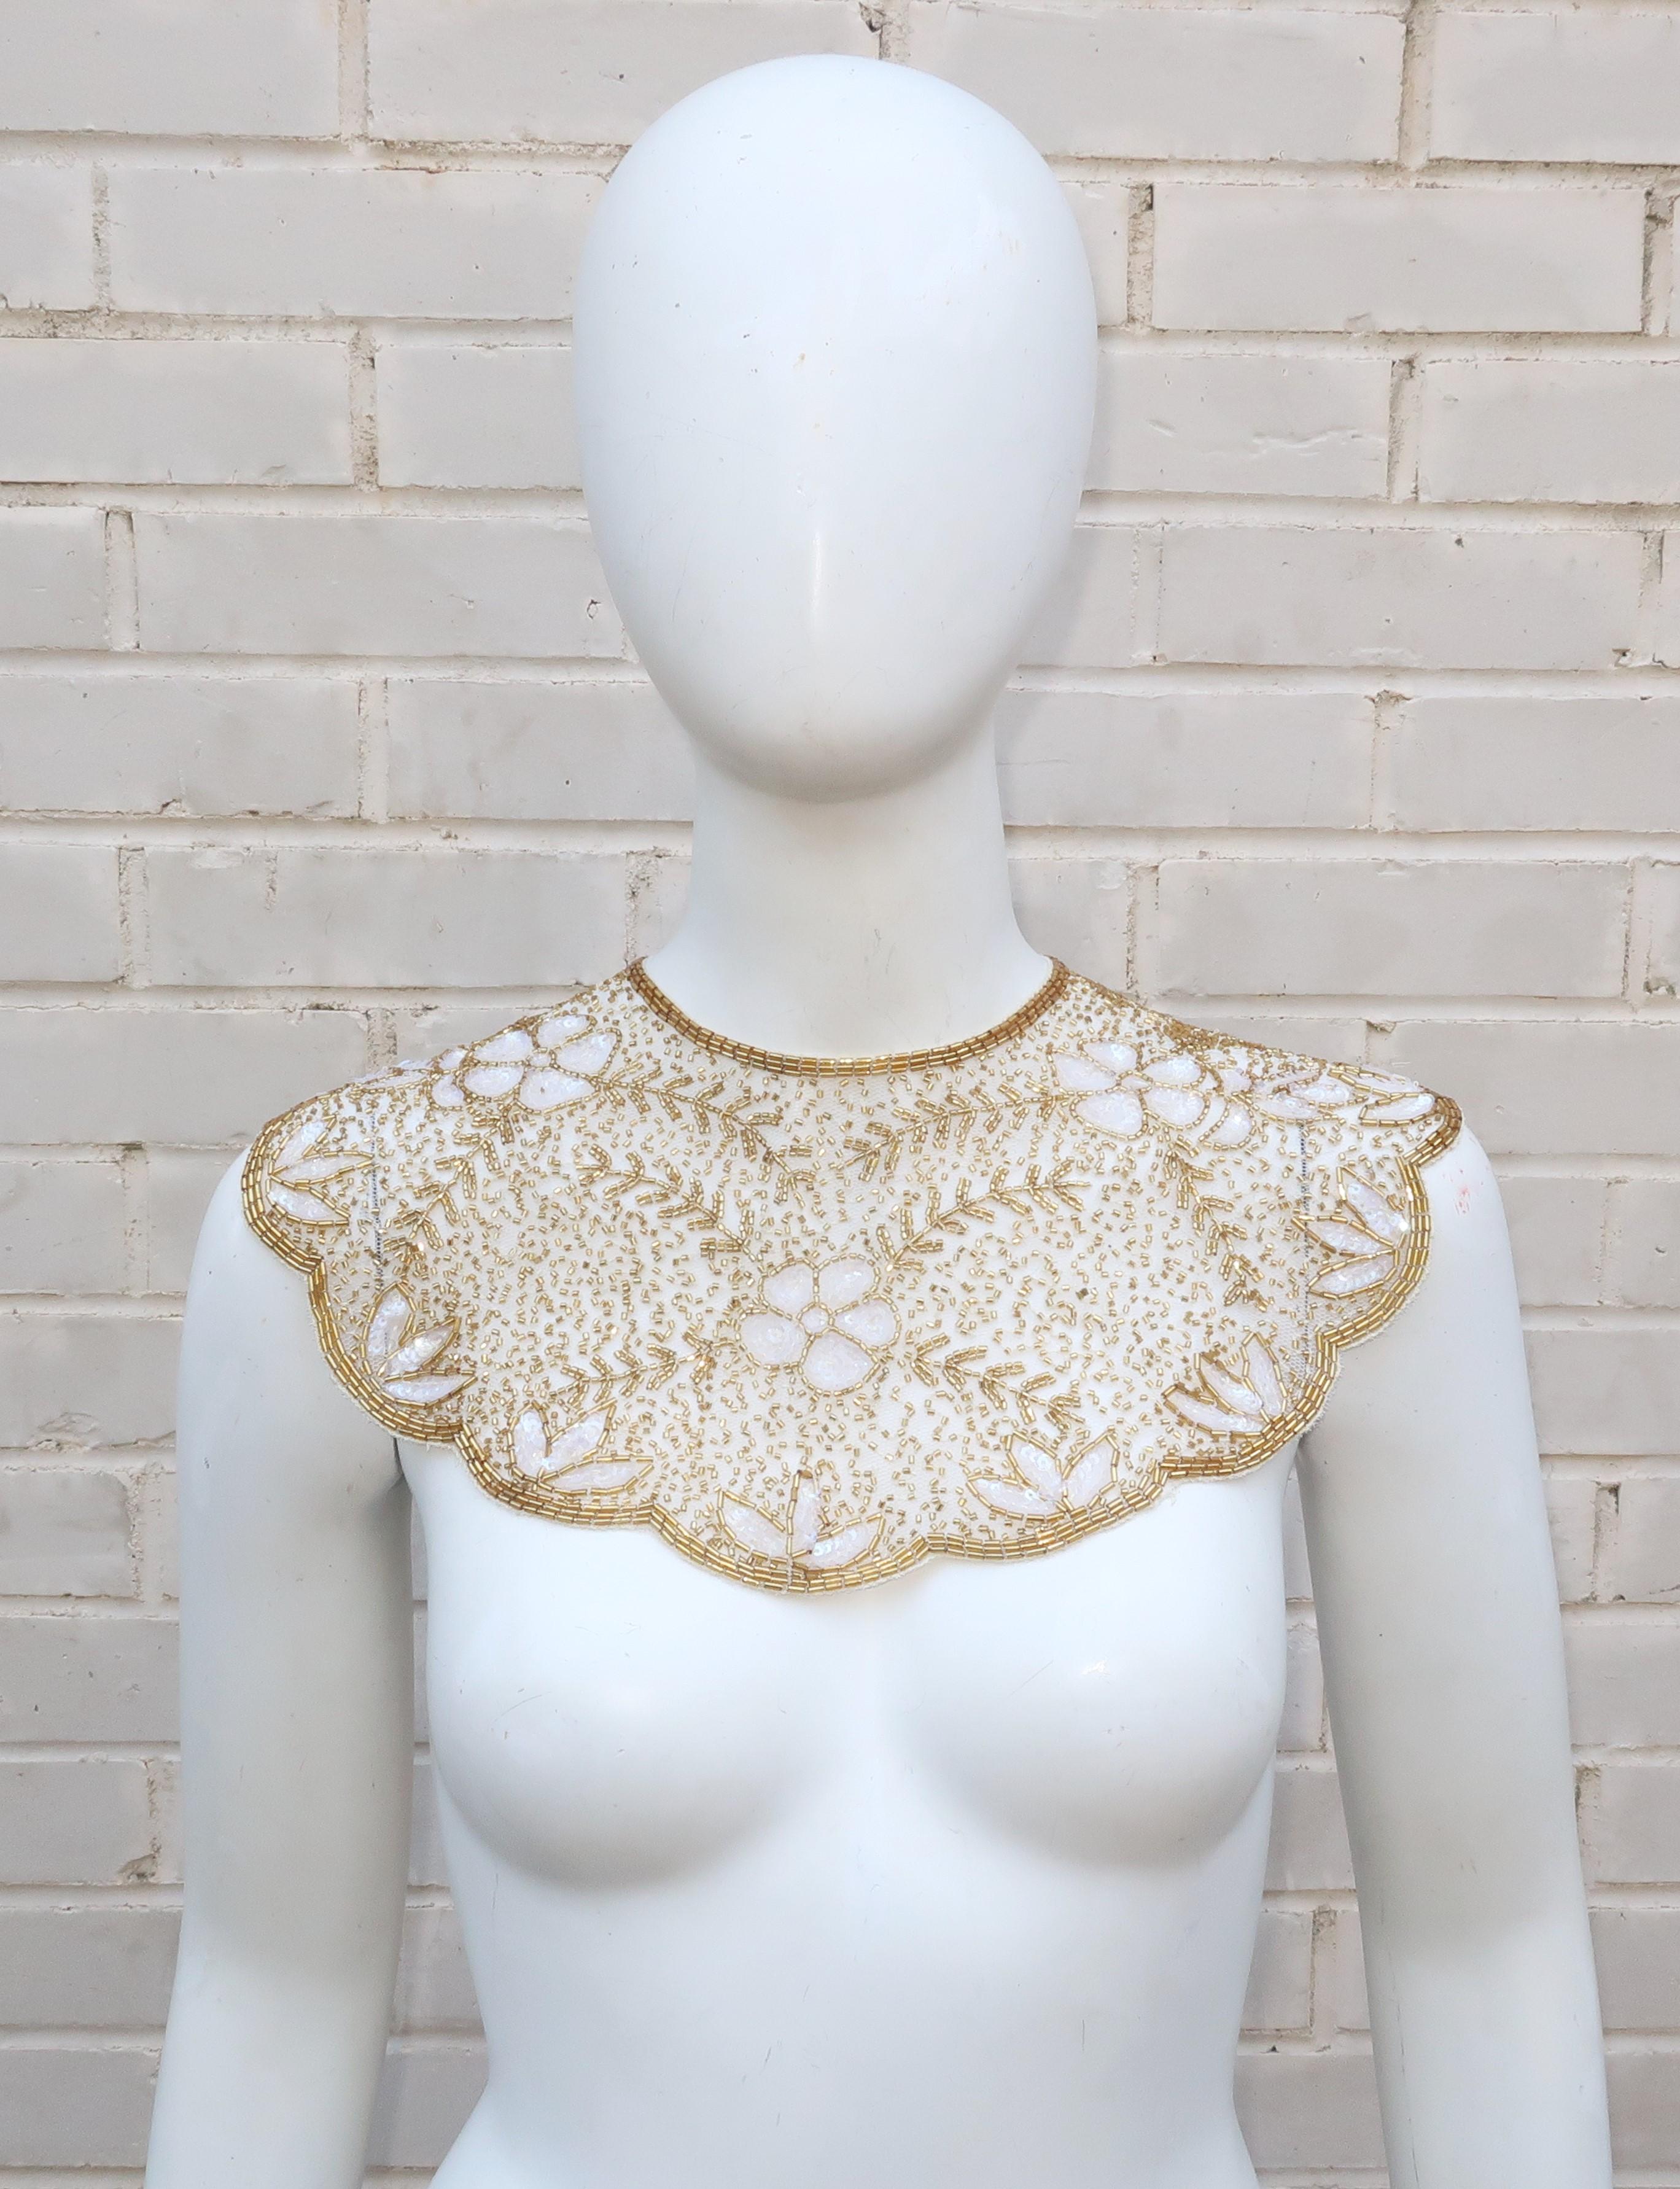 This beautiful Mary McFadden collar is a combination of exotic style and an ethereal look.  The netted candlelight white base has a scallop shape edge with an intricate floral pattern of gold bugle beads and iridescent sequins.  It hooks at the back